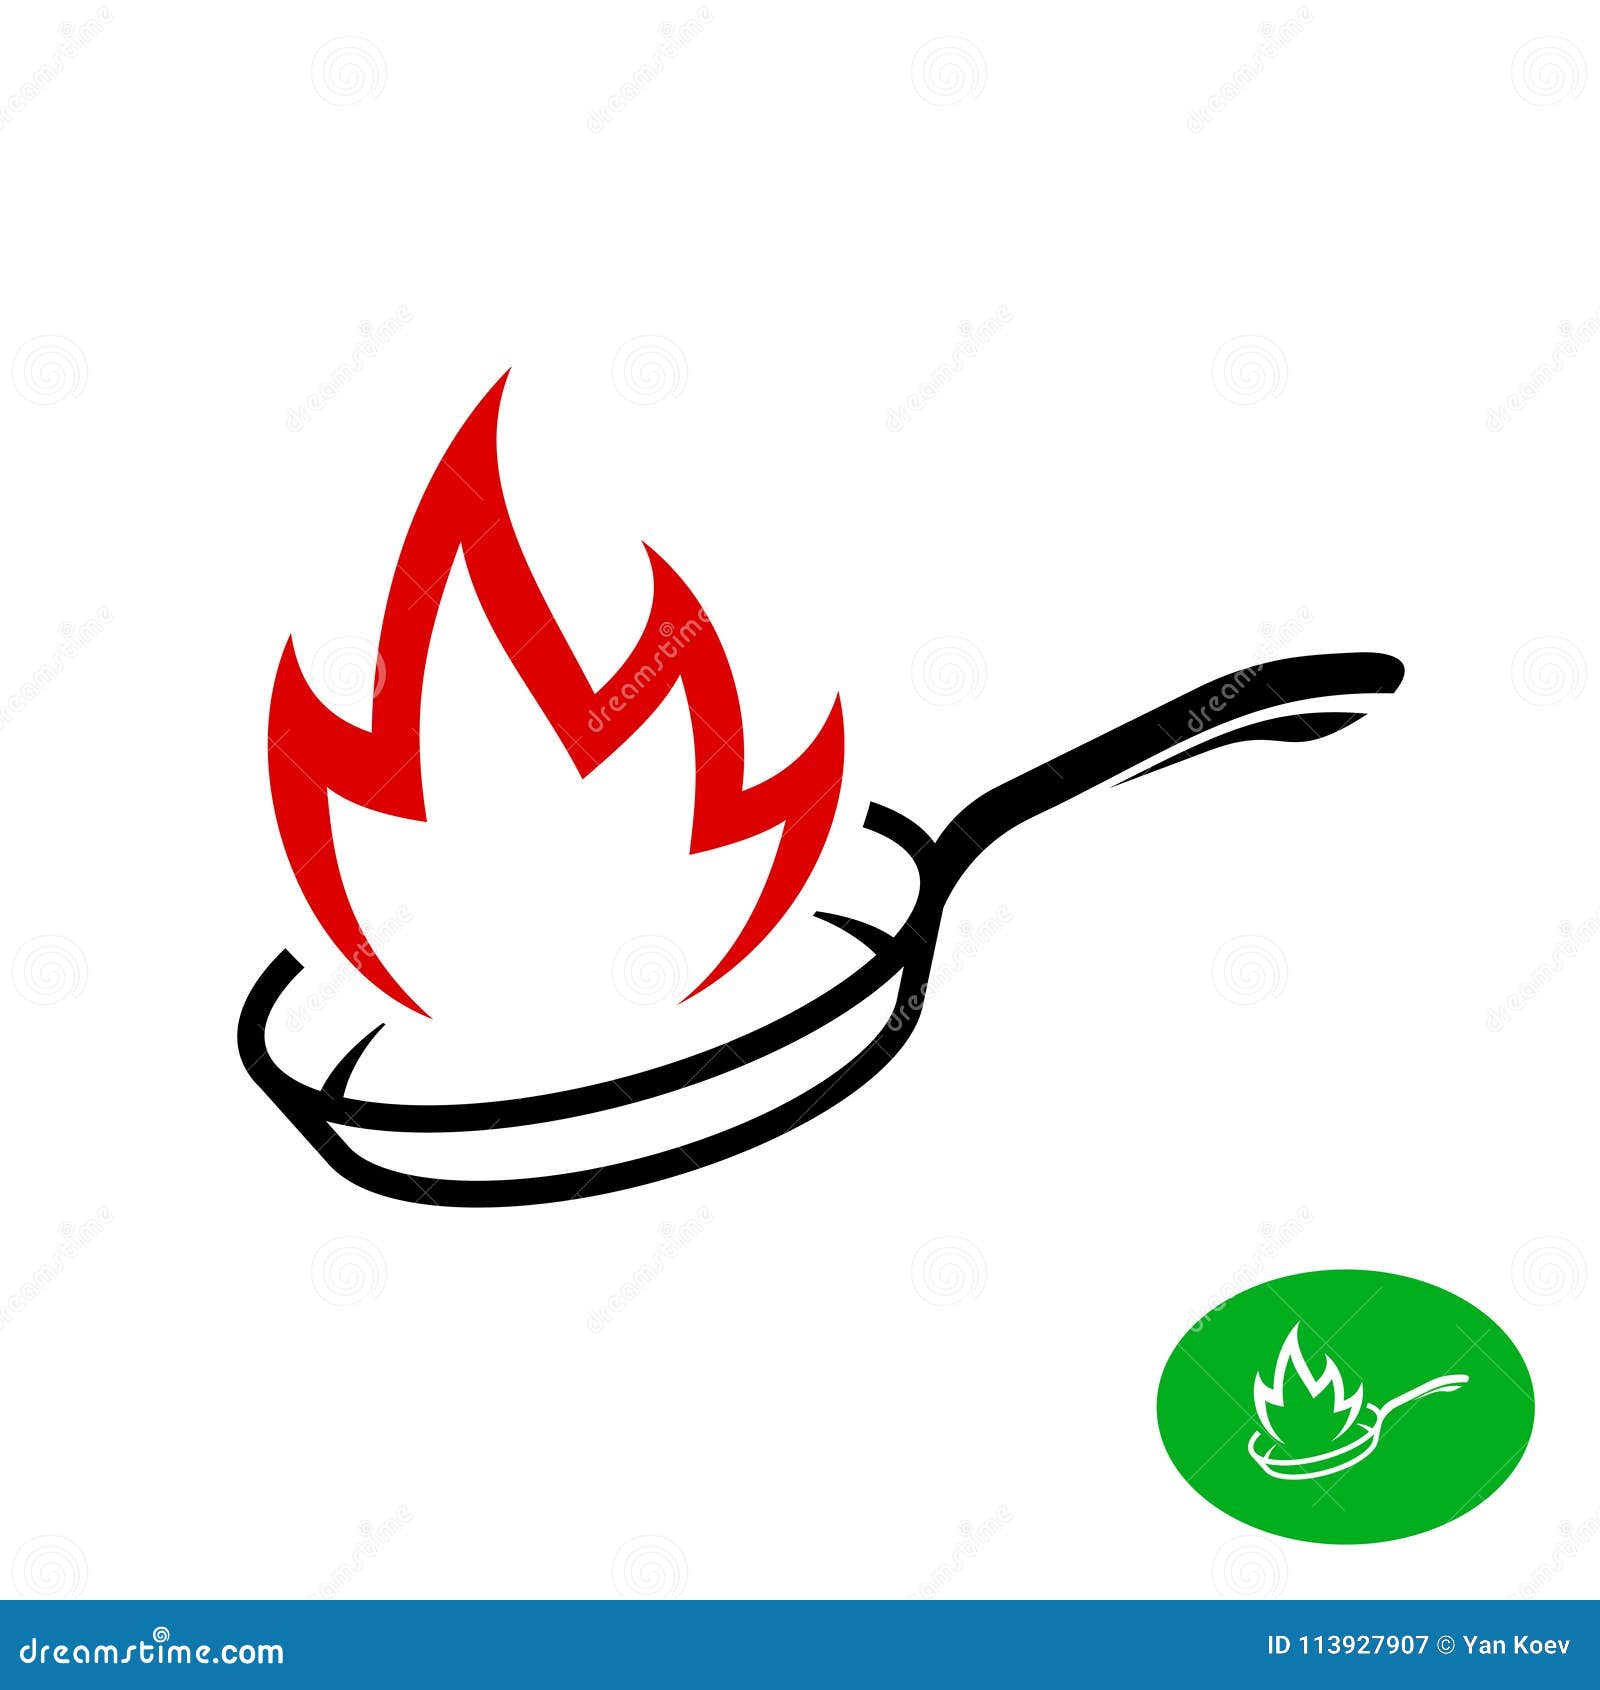 frying pan with fire flame logo.